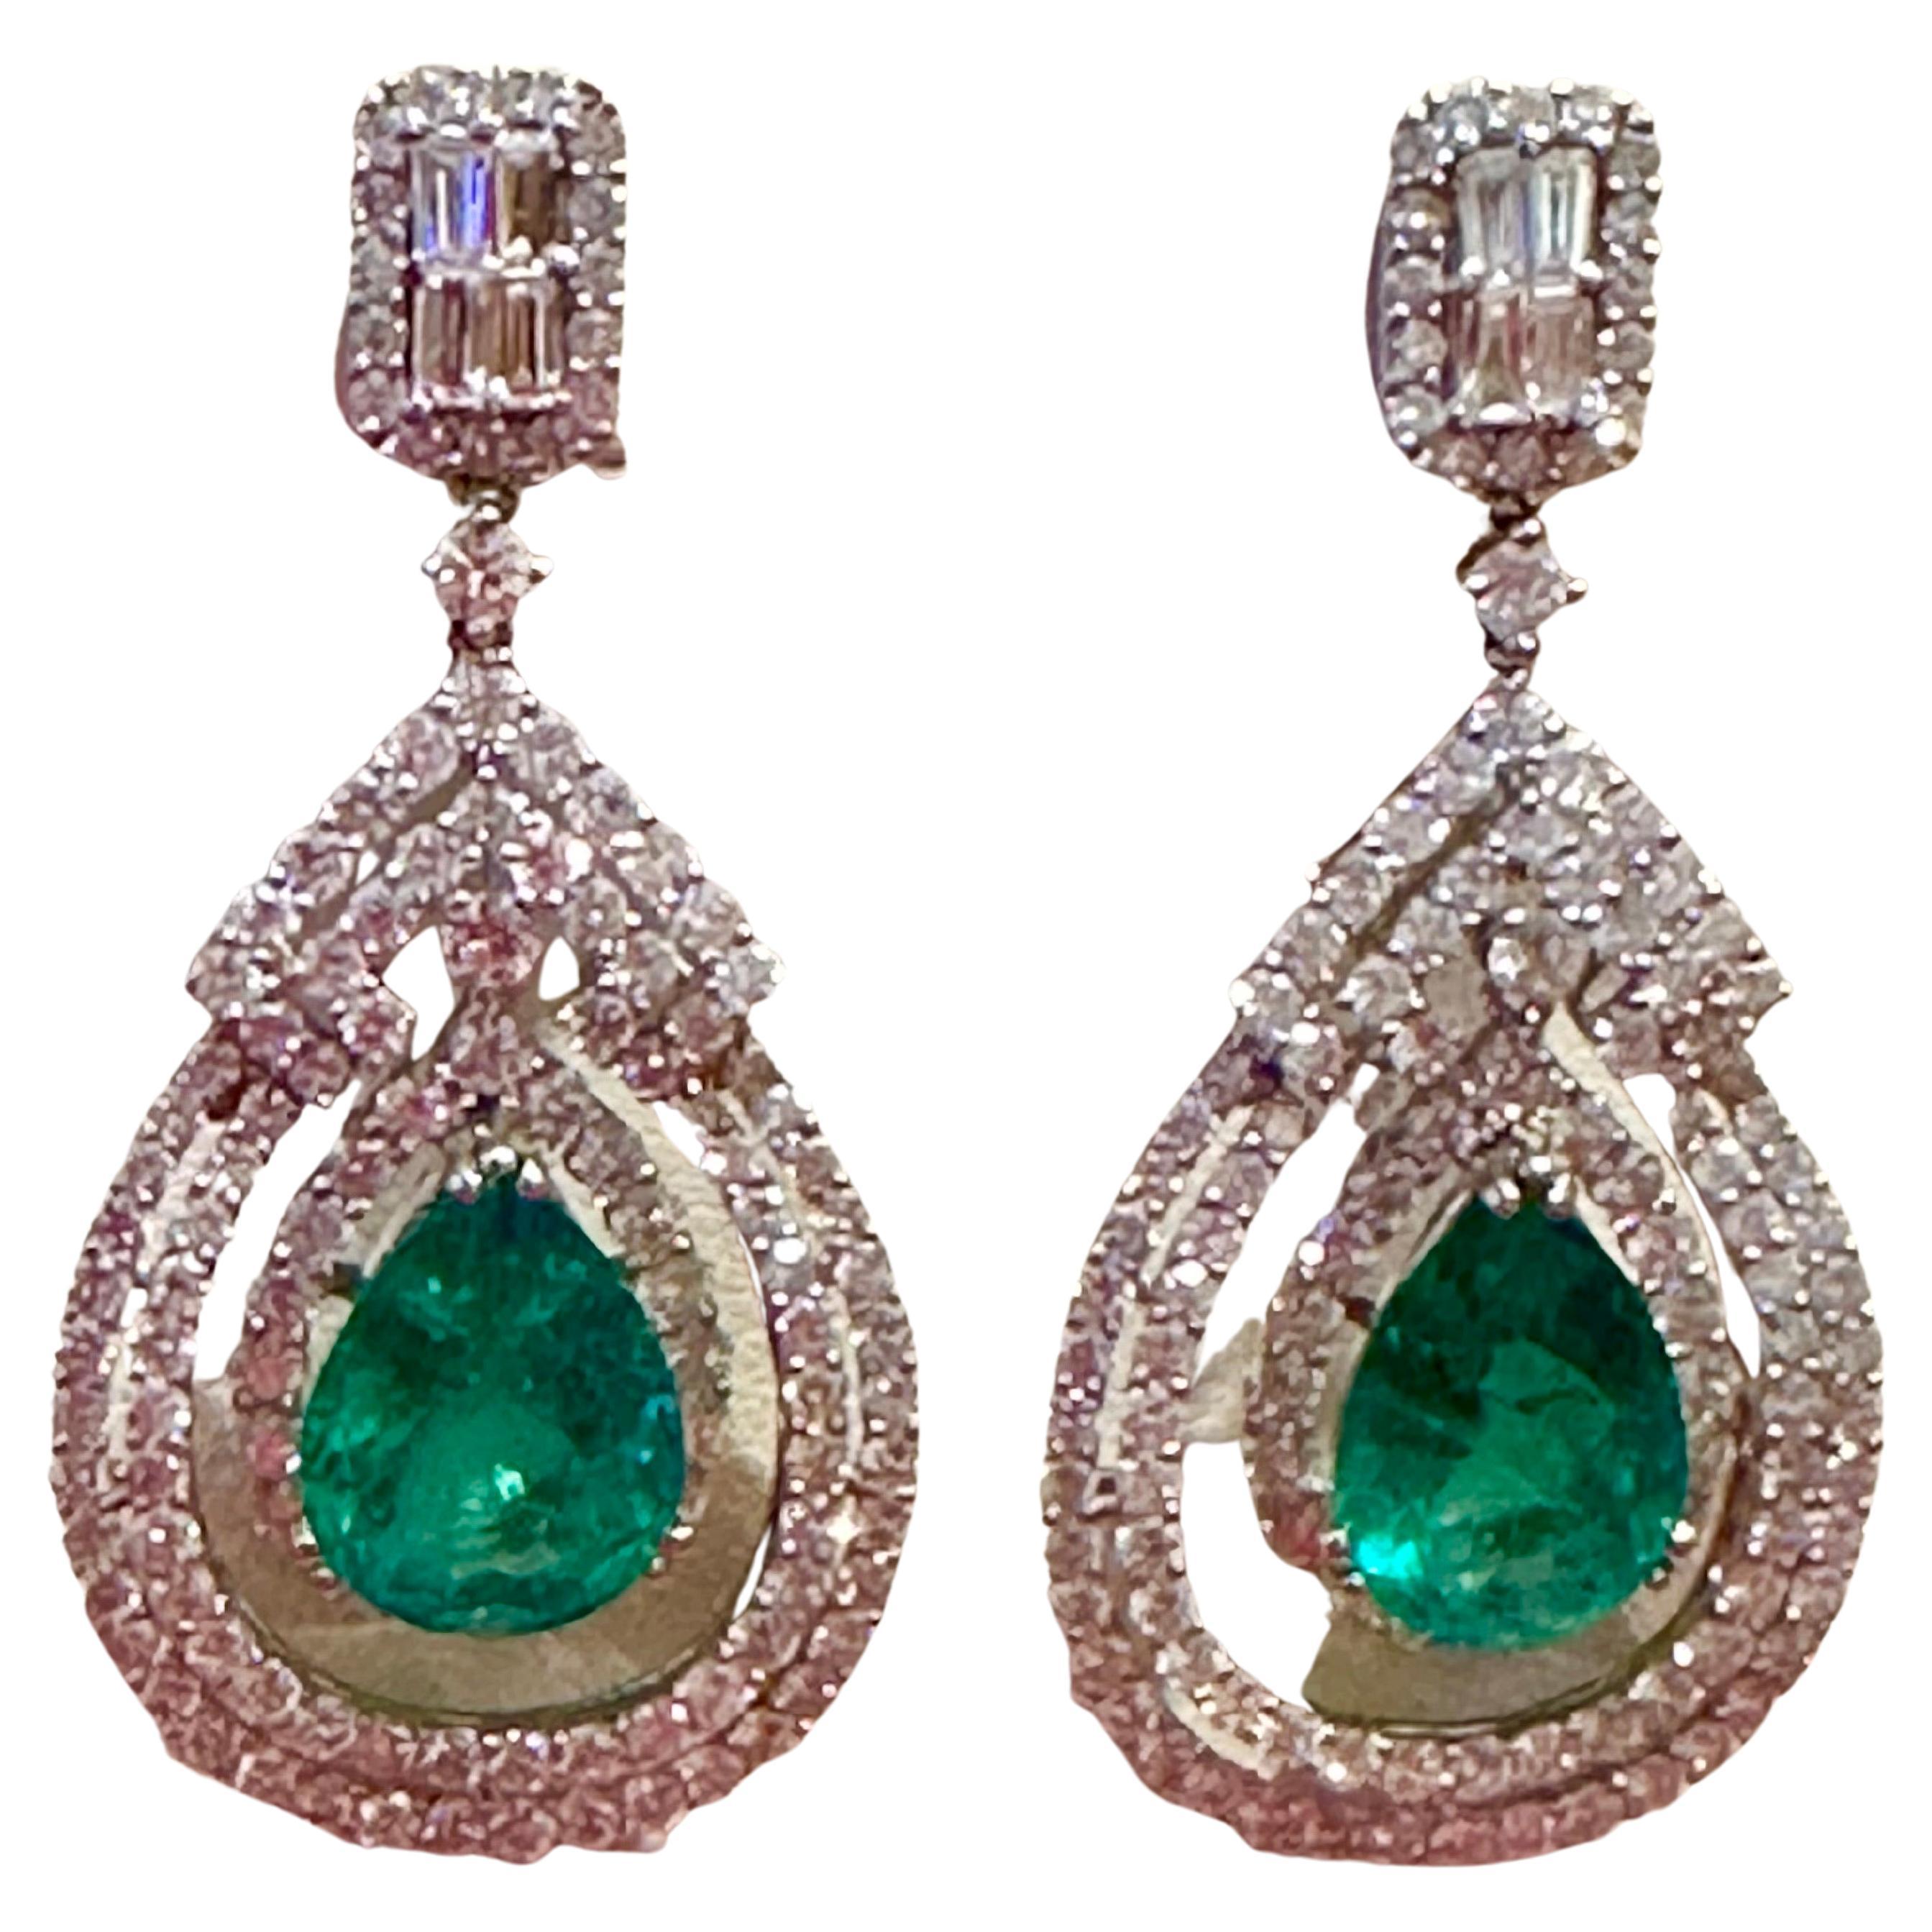 GIA Certified 8Ct Colombian Pear Emerald Diamond Hanging/ Drop Earrings 18K Gold
Approximately 8Ct Colombian Pear Shape Emerald Diamond Hanging/ Drop Earrings 18Kt  White Gold
GIA Report # 6227863246
Natural Beryl
origin Colombia
Clarity Enhancement